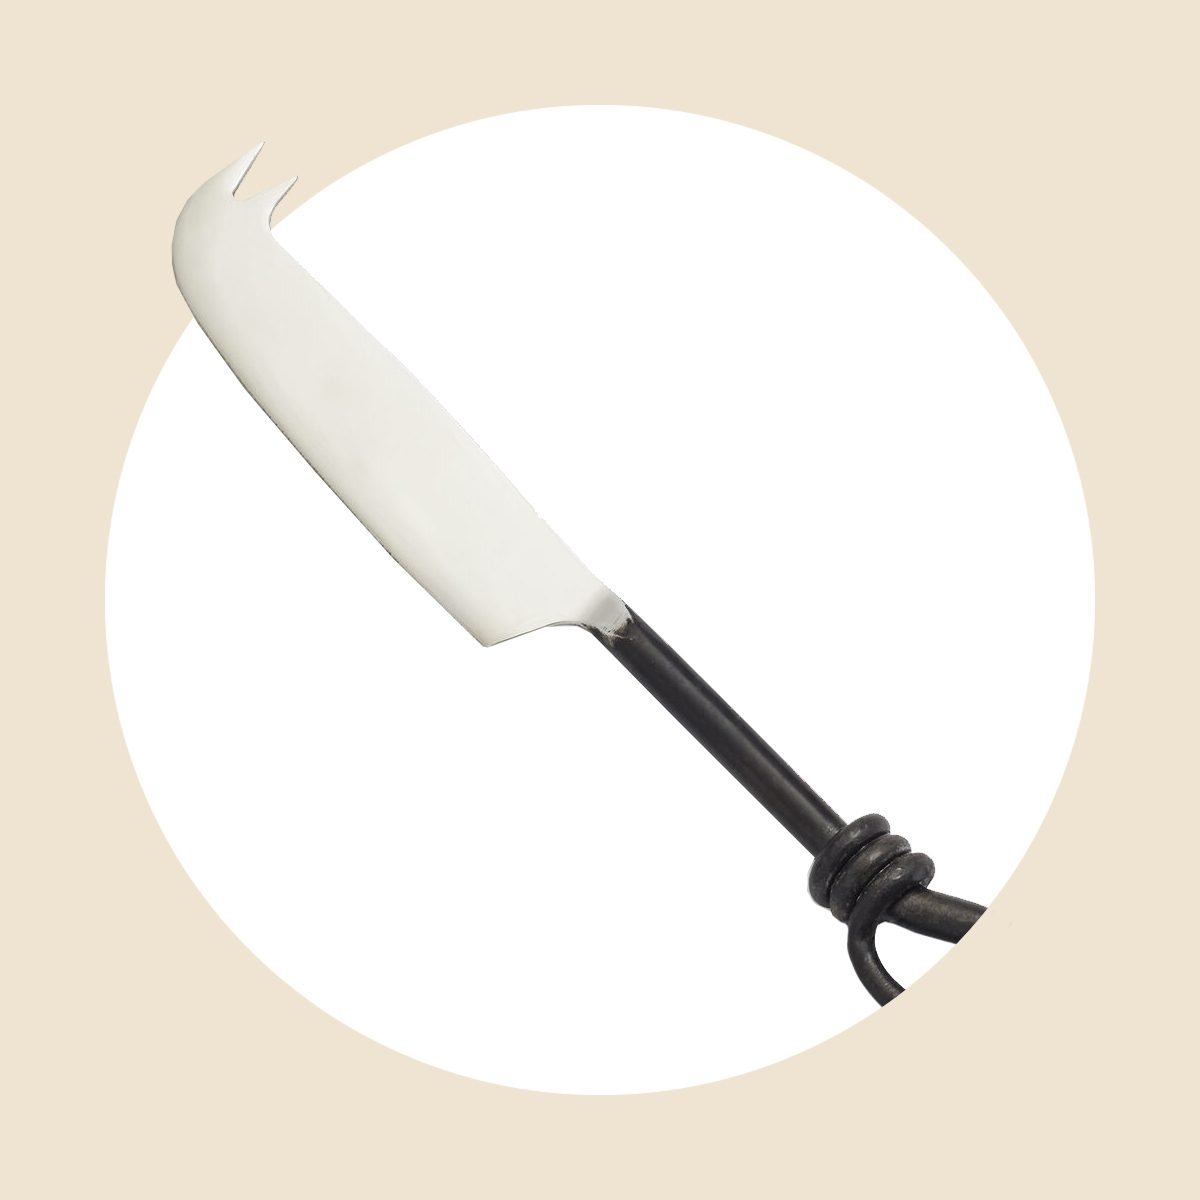 A Helpful Guide to Popular Cheese Knives & How To Correctly Use Them